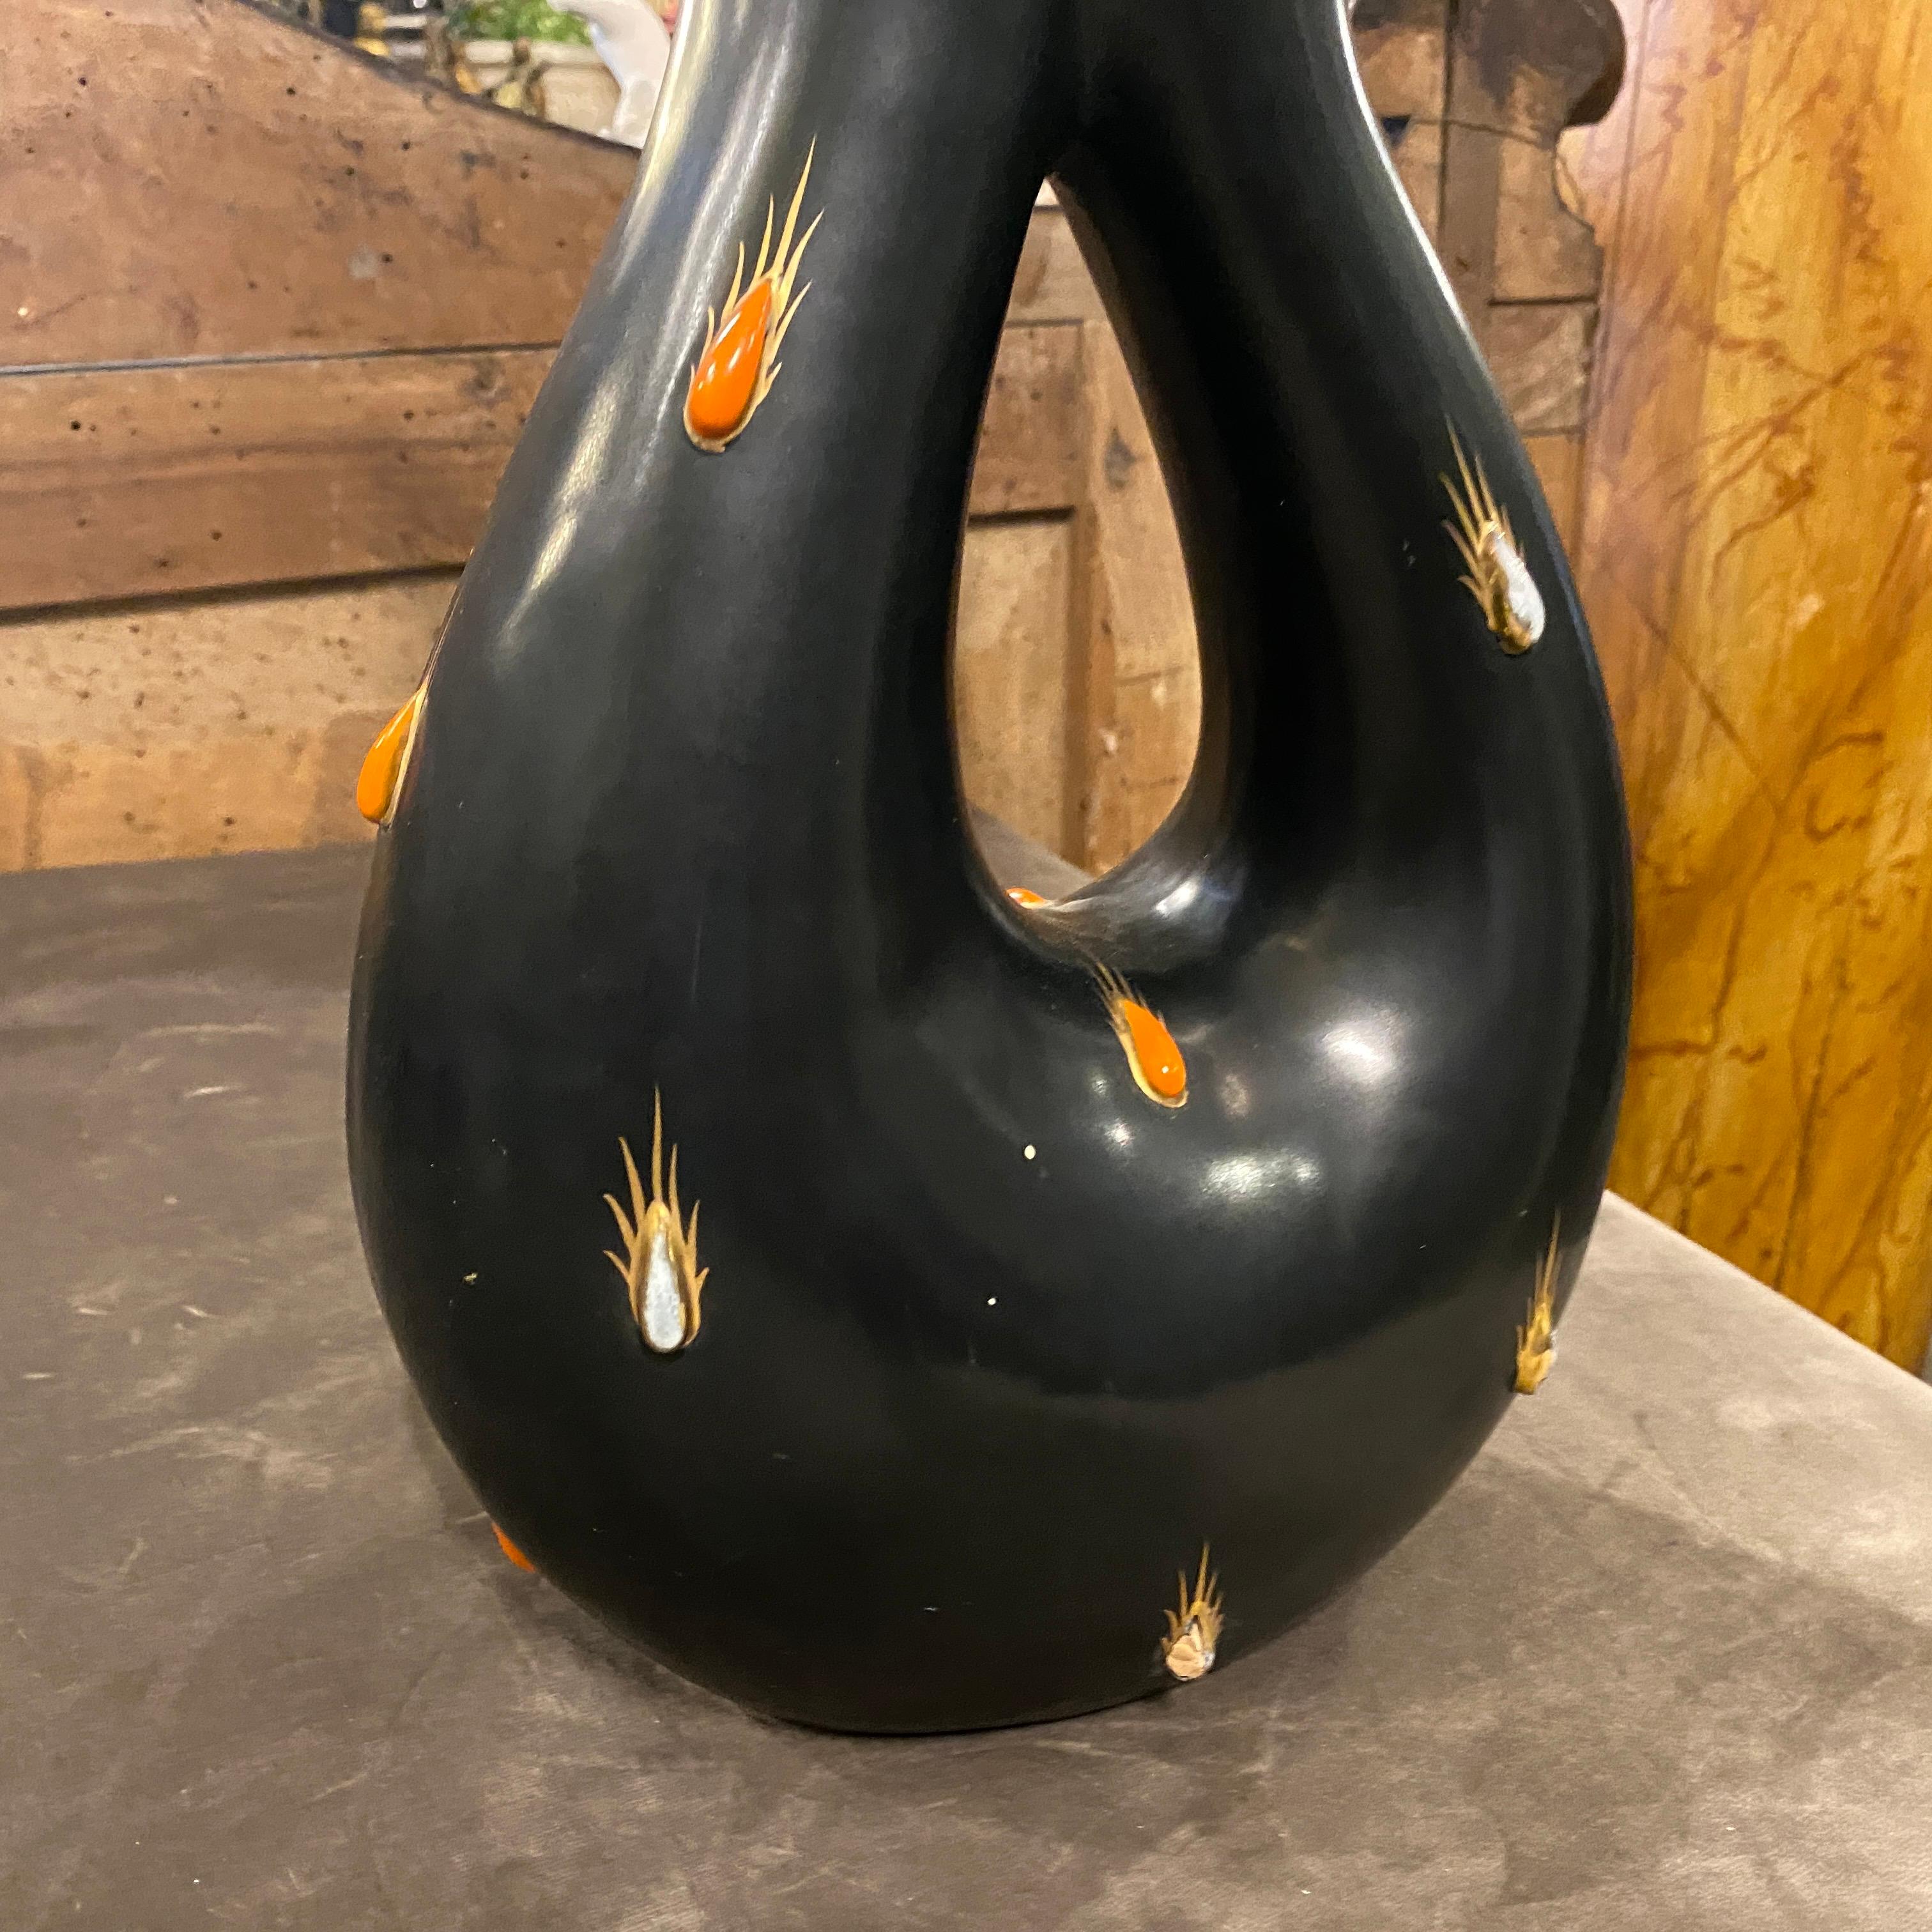 An amazing black and red ceramic vase made in Italy in the Fifties by famous manufacturer Rometti. It's marked on the bottom. The dimensions and the particular shape make this object unique and a superb example of mid-century modern italian ceramic.